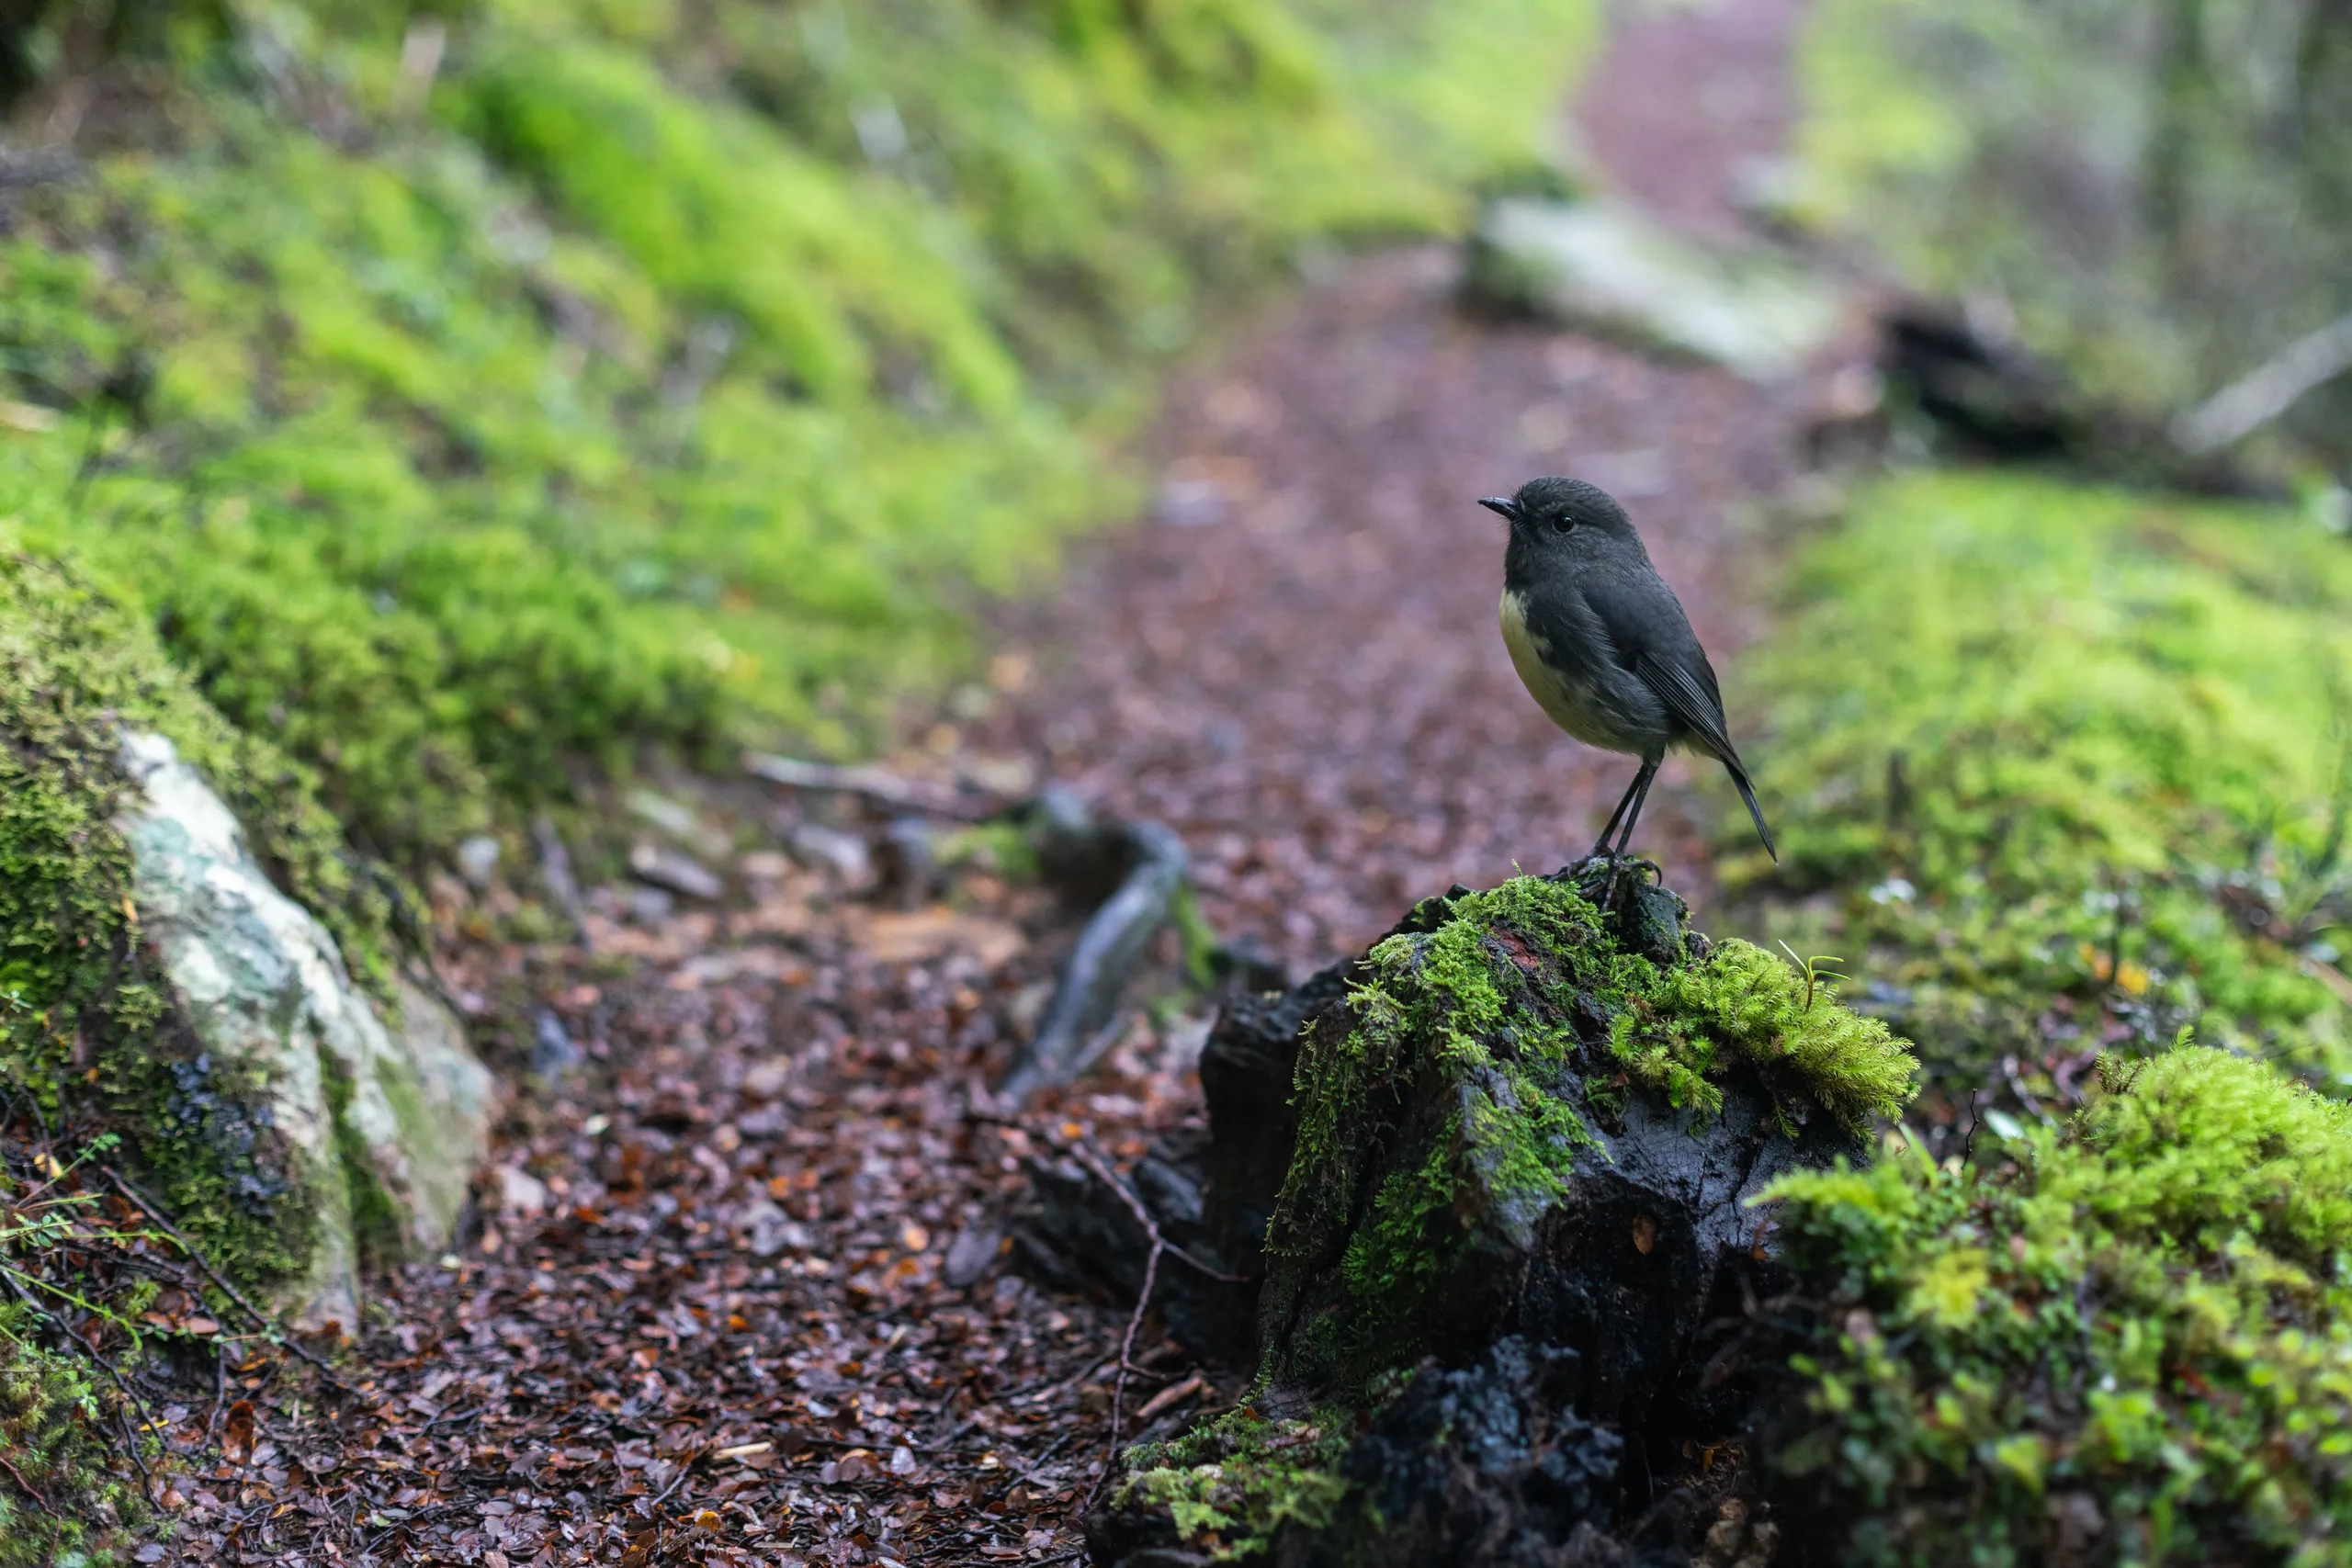 Many friendly Robins were encountered. So too were Pīwakawaka, which followed us along sizeable sections of the trail.